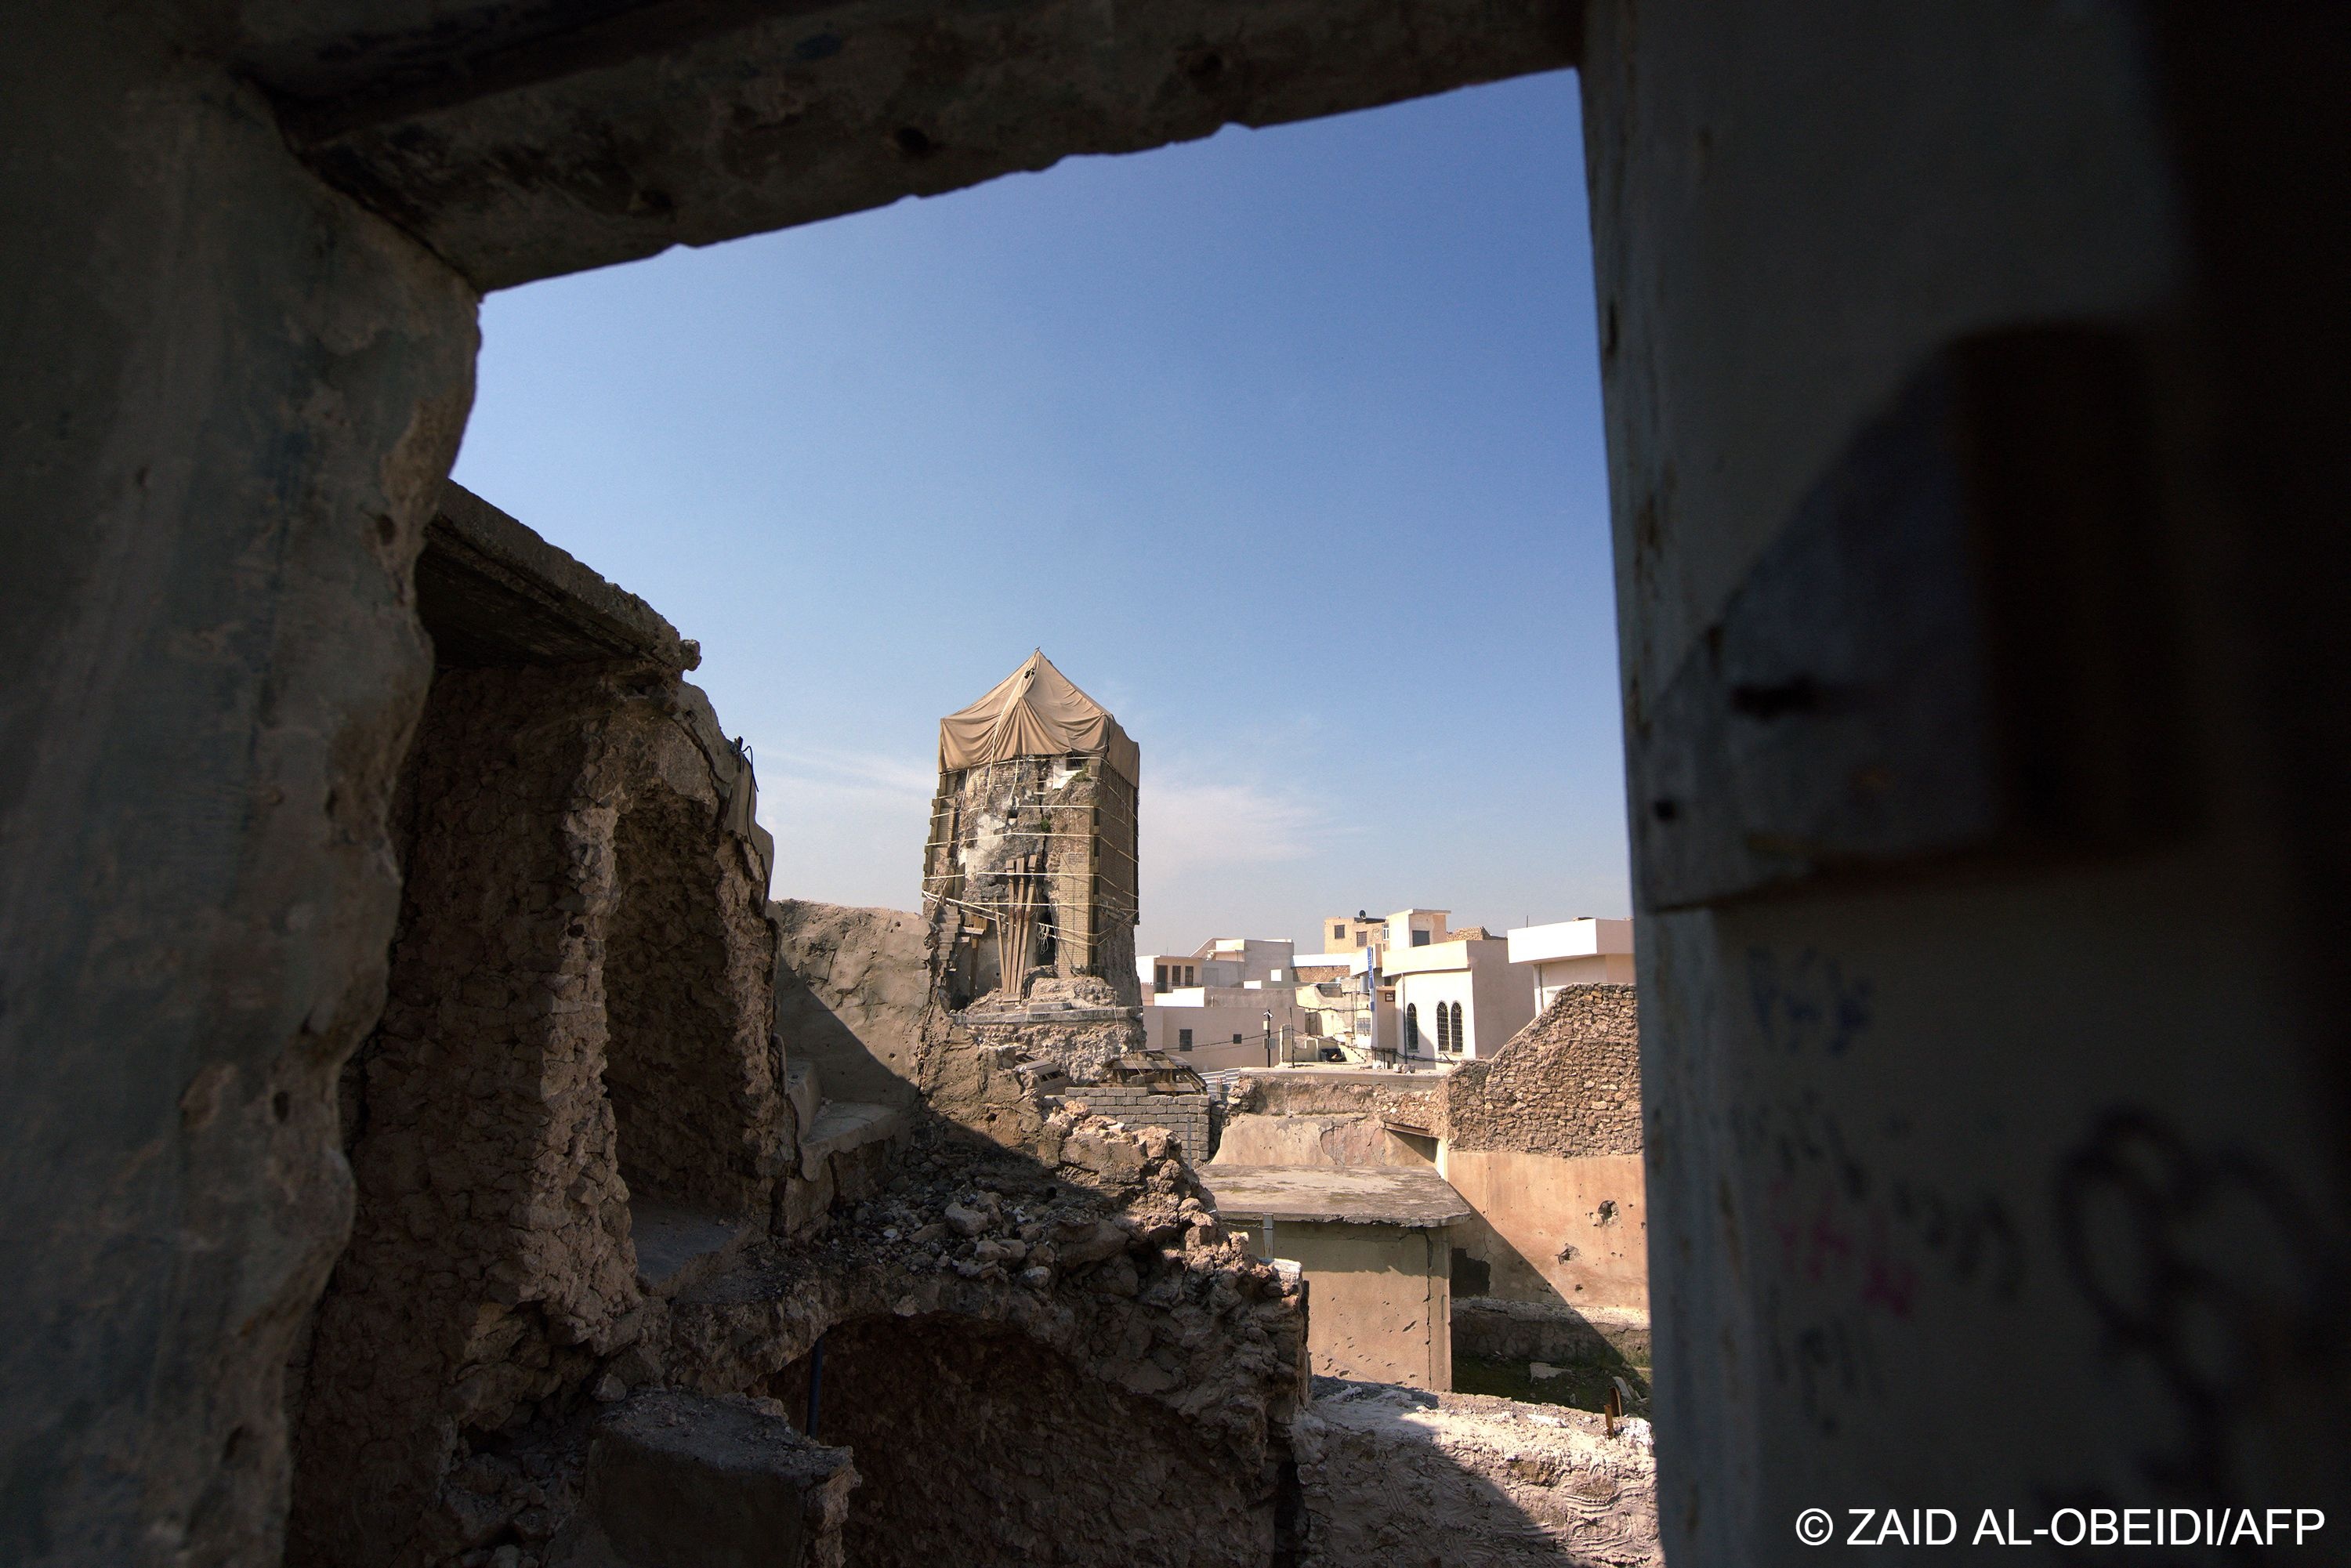 A picture shows a view of renovations at the al-Nuri mosque and surounding area in the old town of Iraq‘s northern city of Mosul, on 23 February 2022 (photo: Zaid Al-Obeidi/AFP)